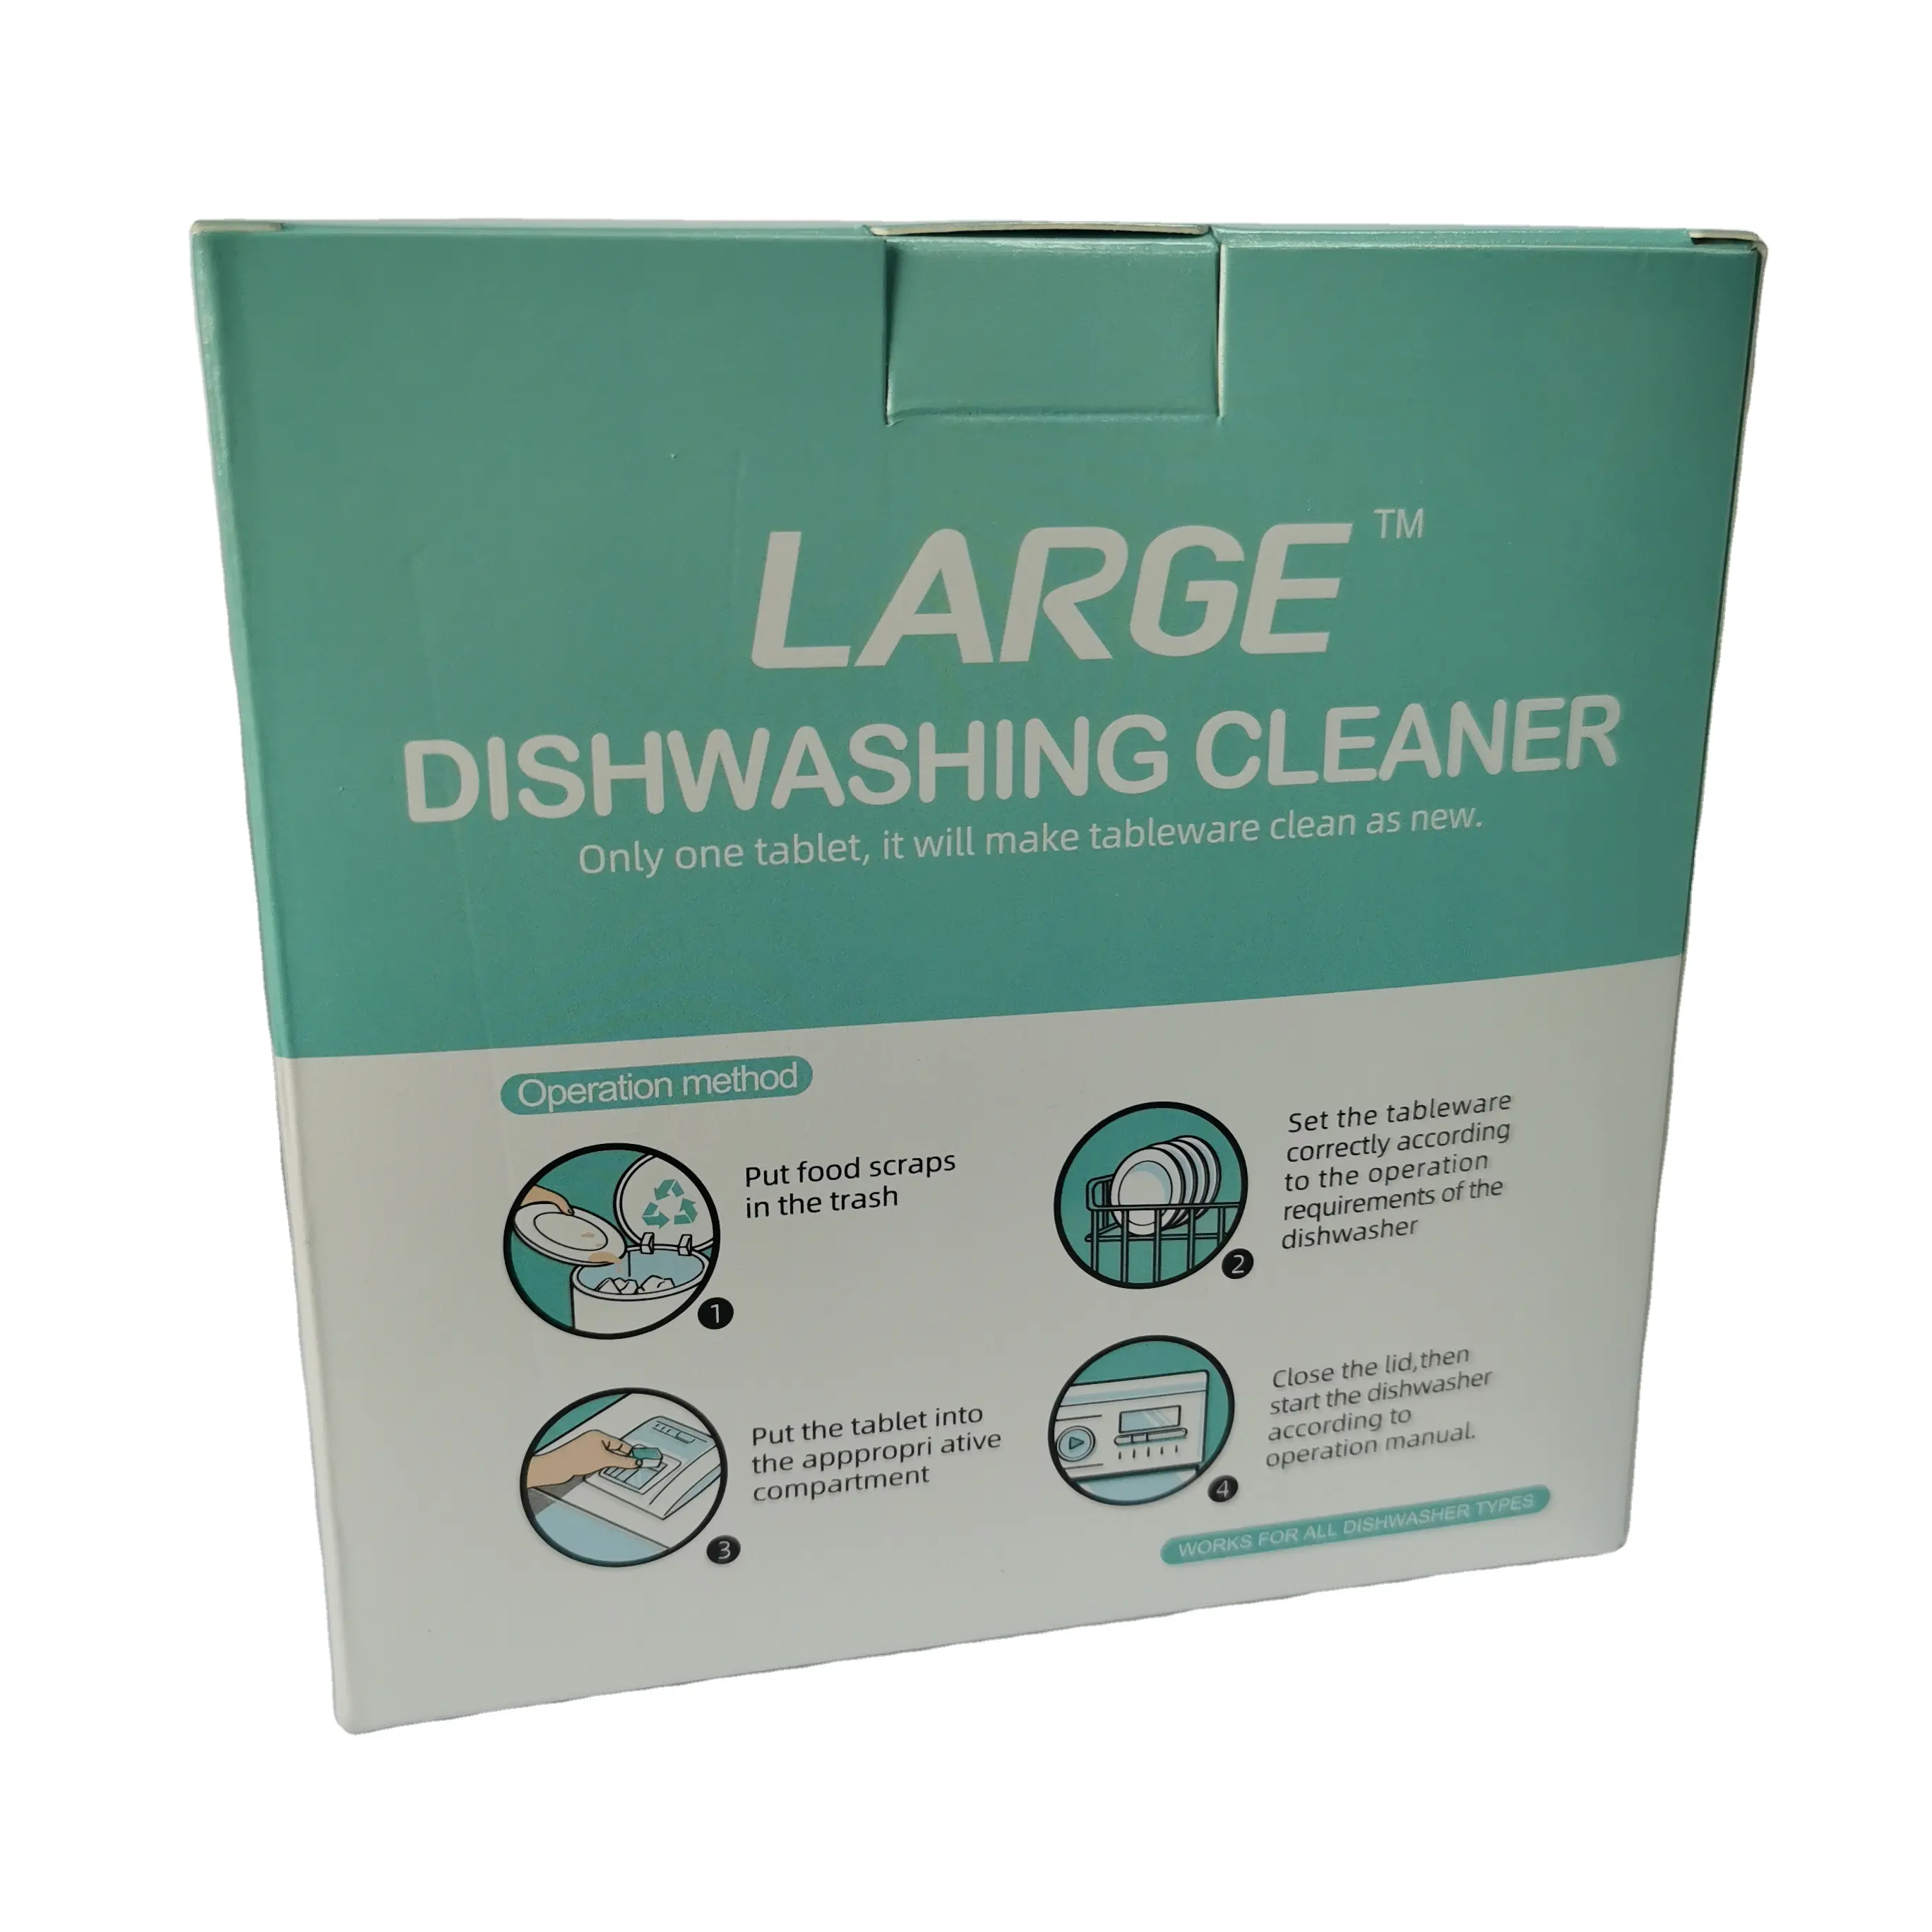 Kitchen dishwashing cleaner tablet concentrated rapid foaming effervescent tablets for cleaning stains without damaging hand